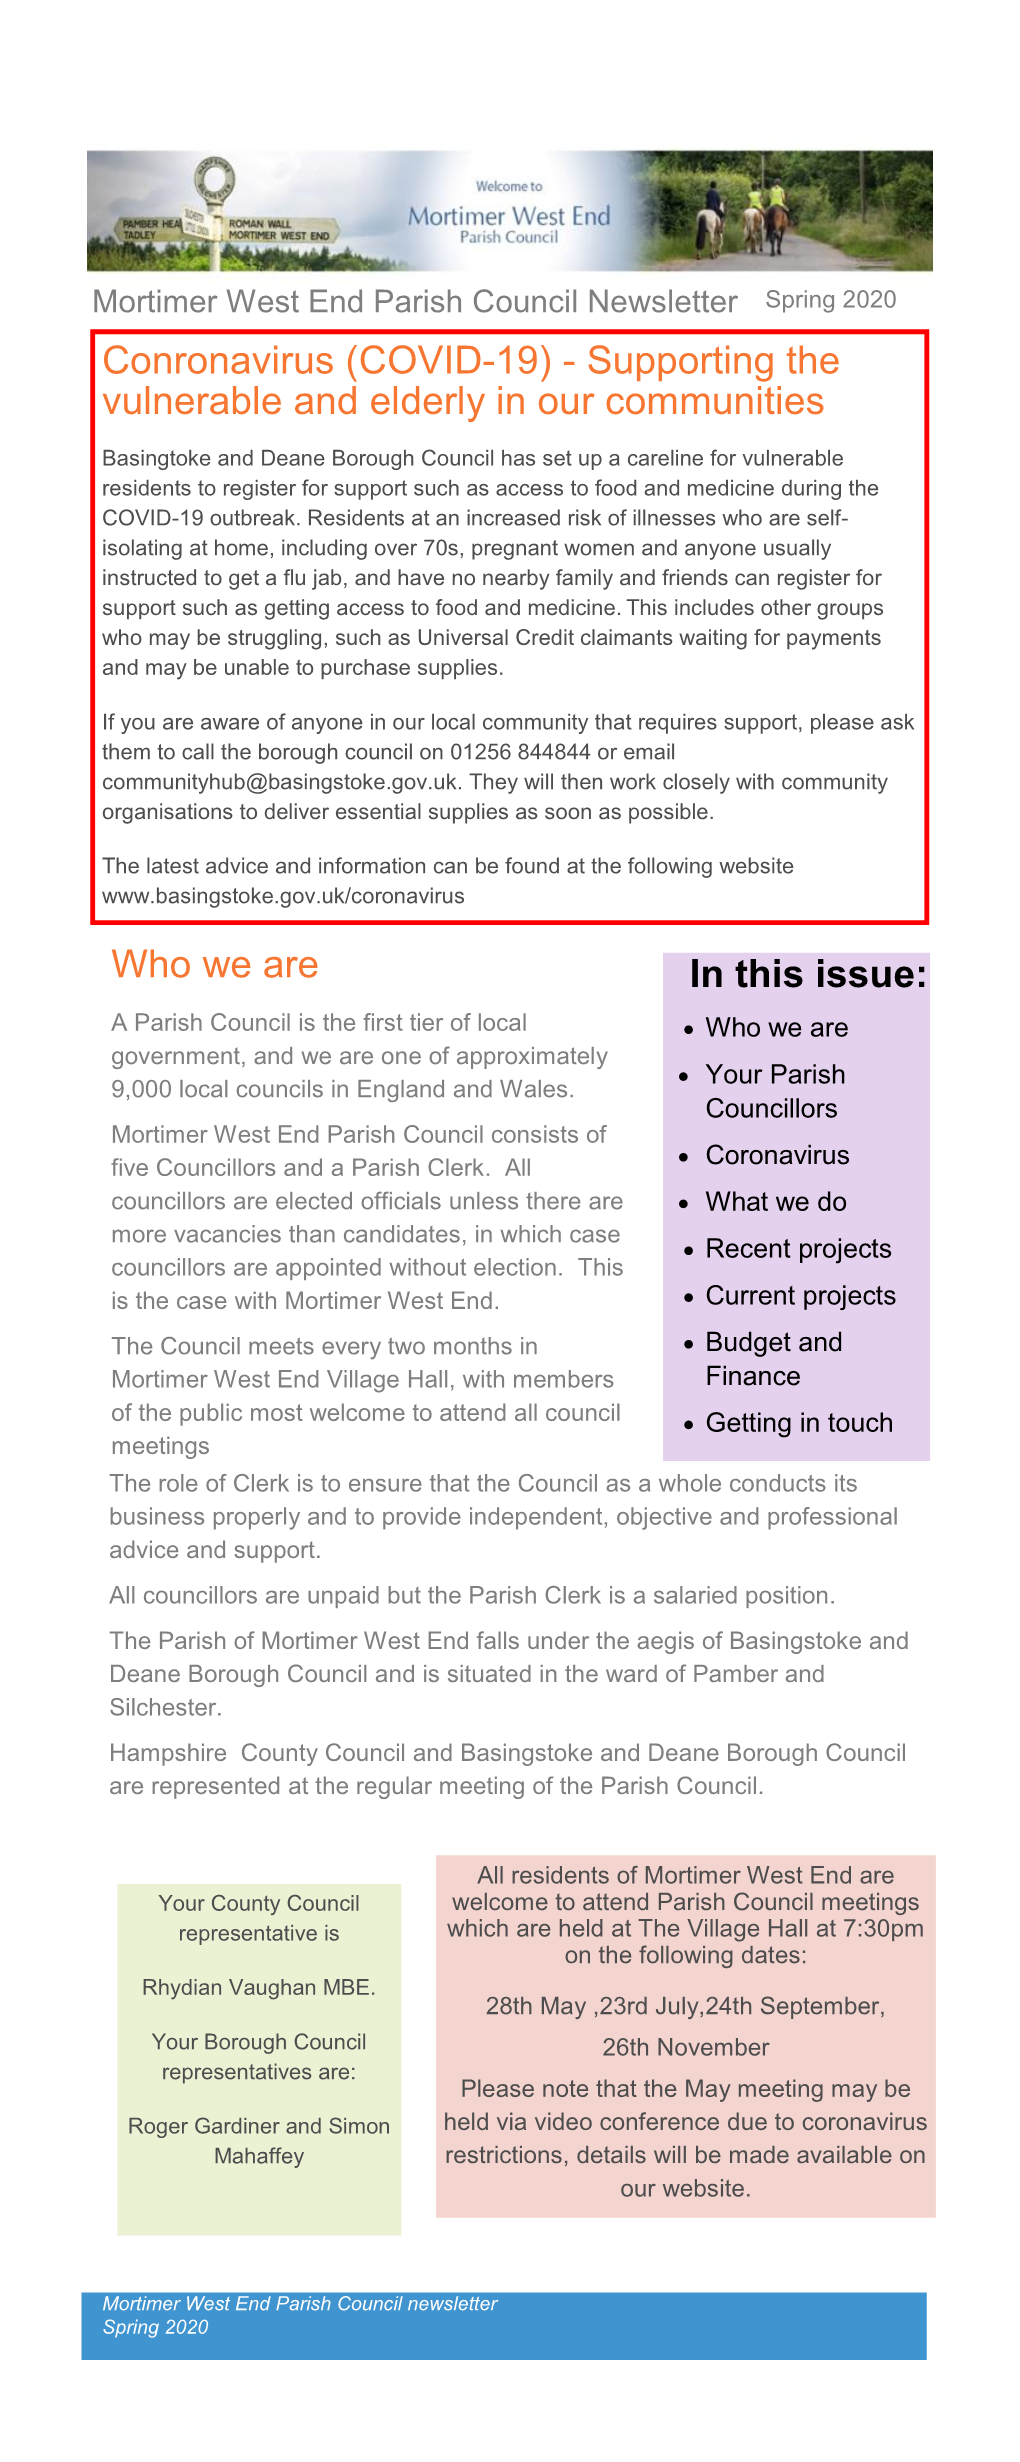 Mortimer West End Parish Council Newsletter Spring 2020 Conronavirus (COVID-19) - Supporting the Vulnerable and Elderly in Our Communities